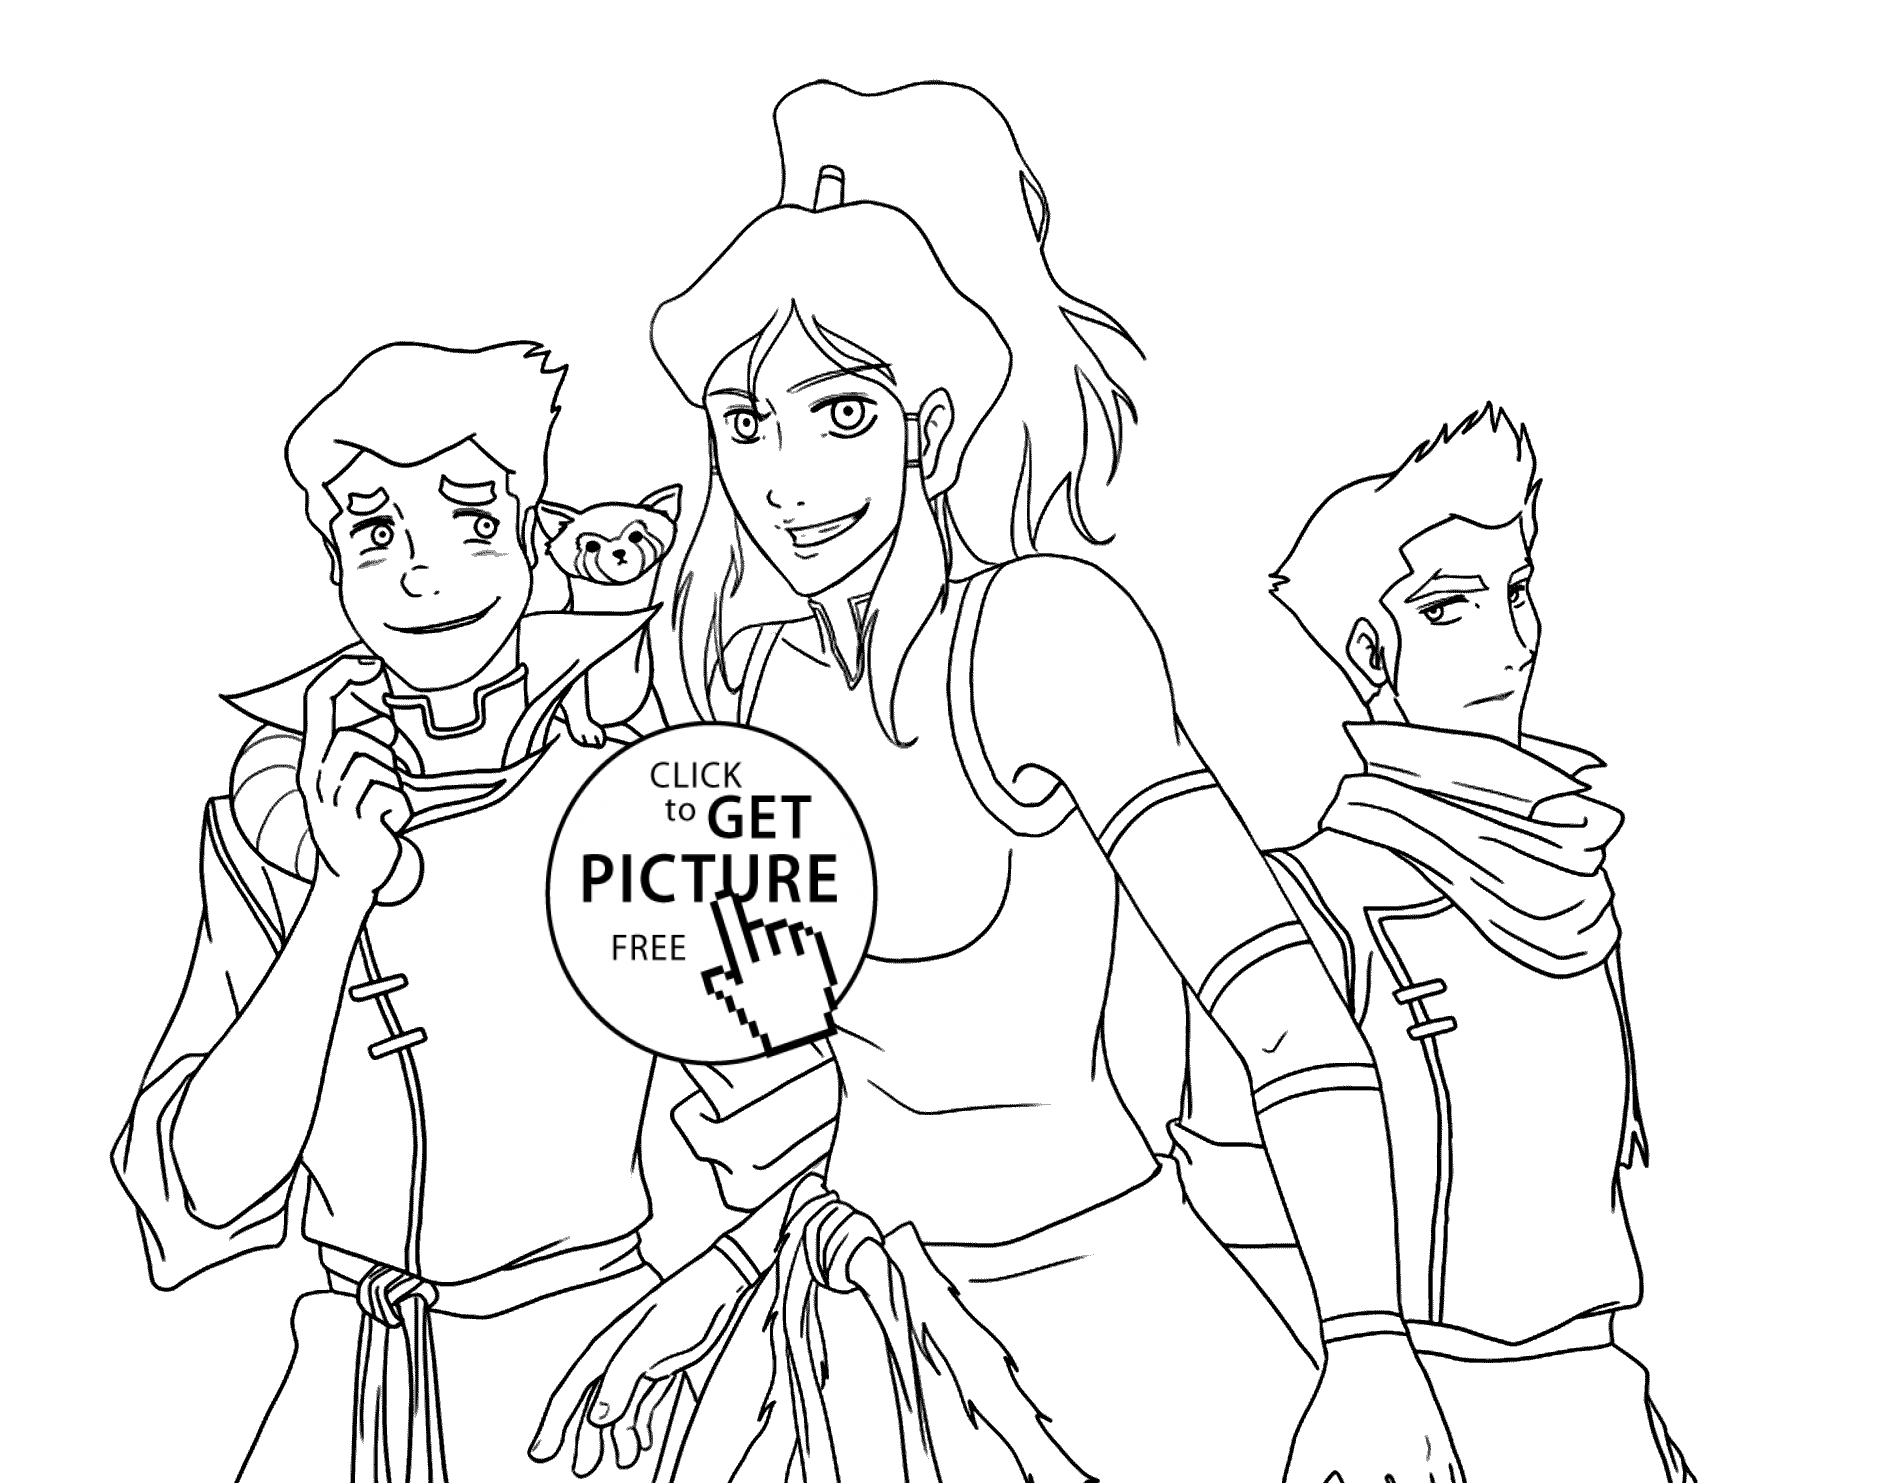 Korra and friends coloring pages for kids, printable free - The ...